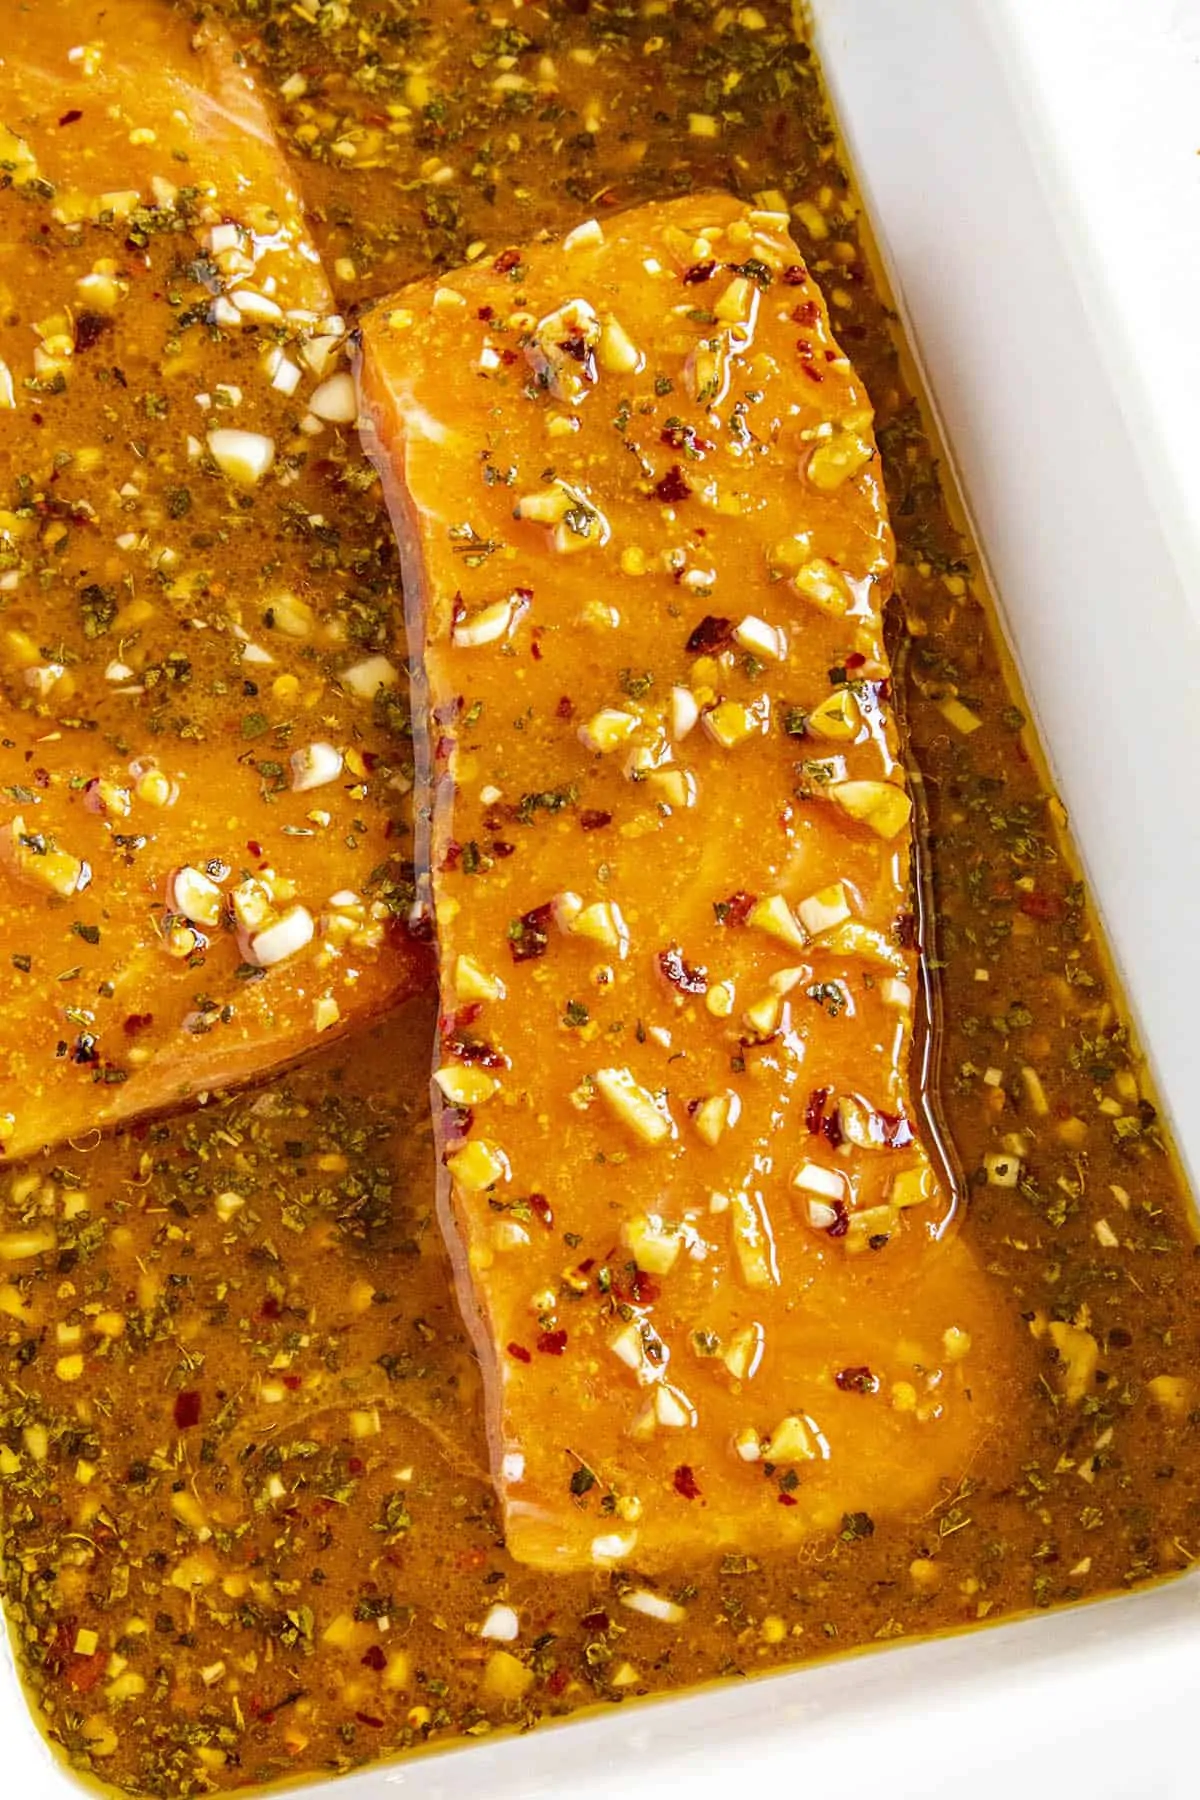 Slices of pink salmon marinating in a bowl of spicy salmon marinade